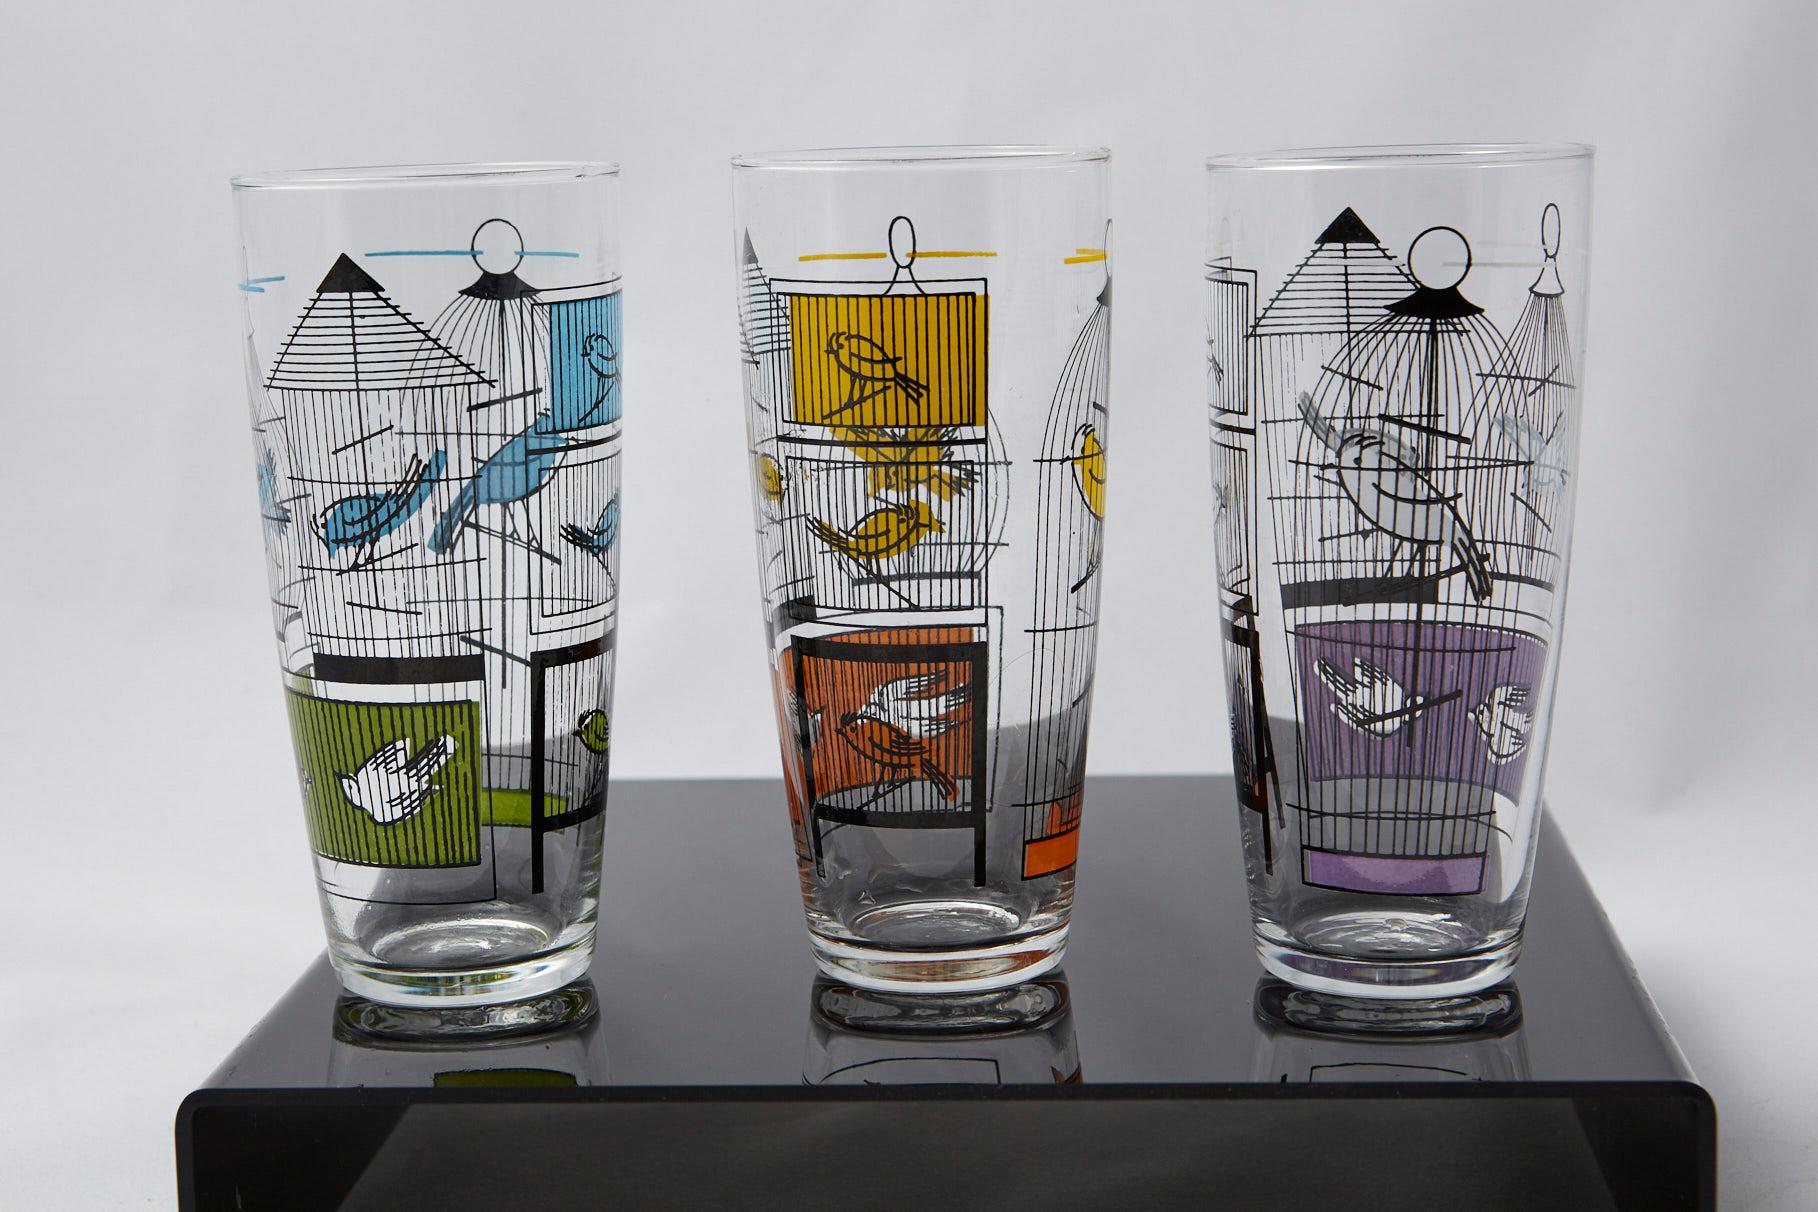 Lovely set of 6 new, colorful tall drinking glasses with typically 1950s style designed images of birds in cages, in the original box, designed and manufactured by Durobor, Belgium 1950s.
The glasses are in excellent original condition, never used.